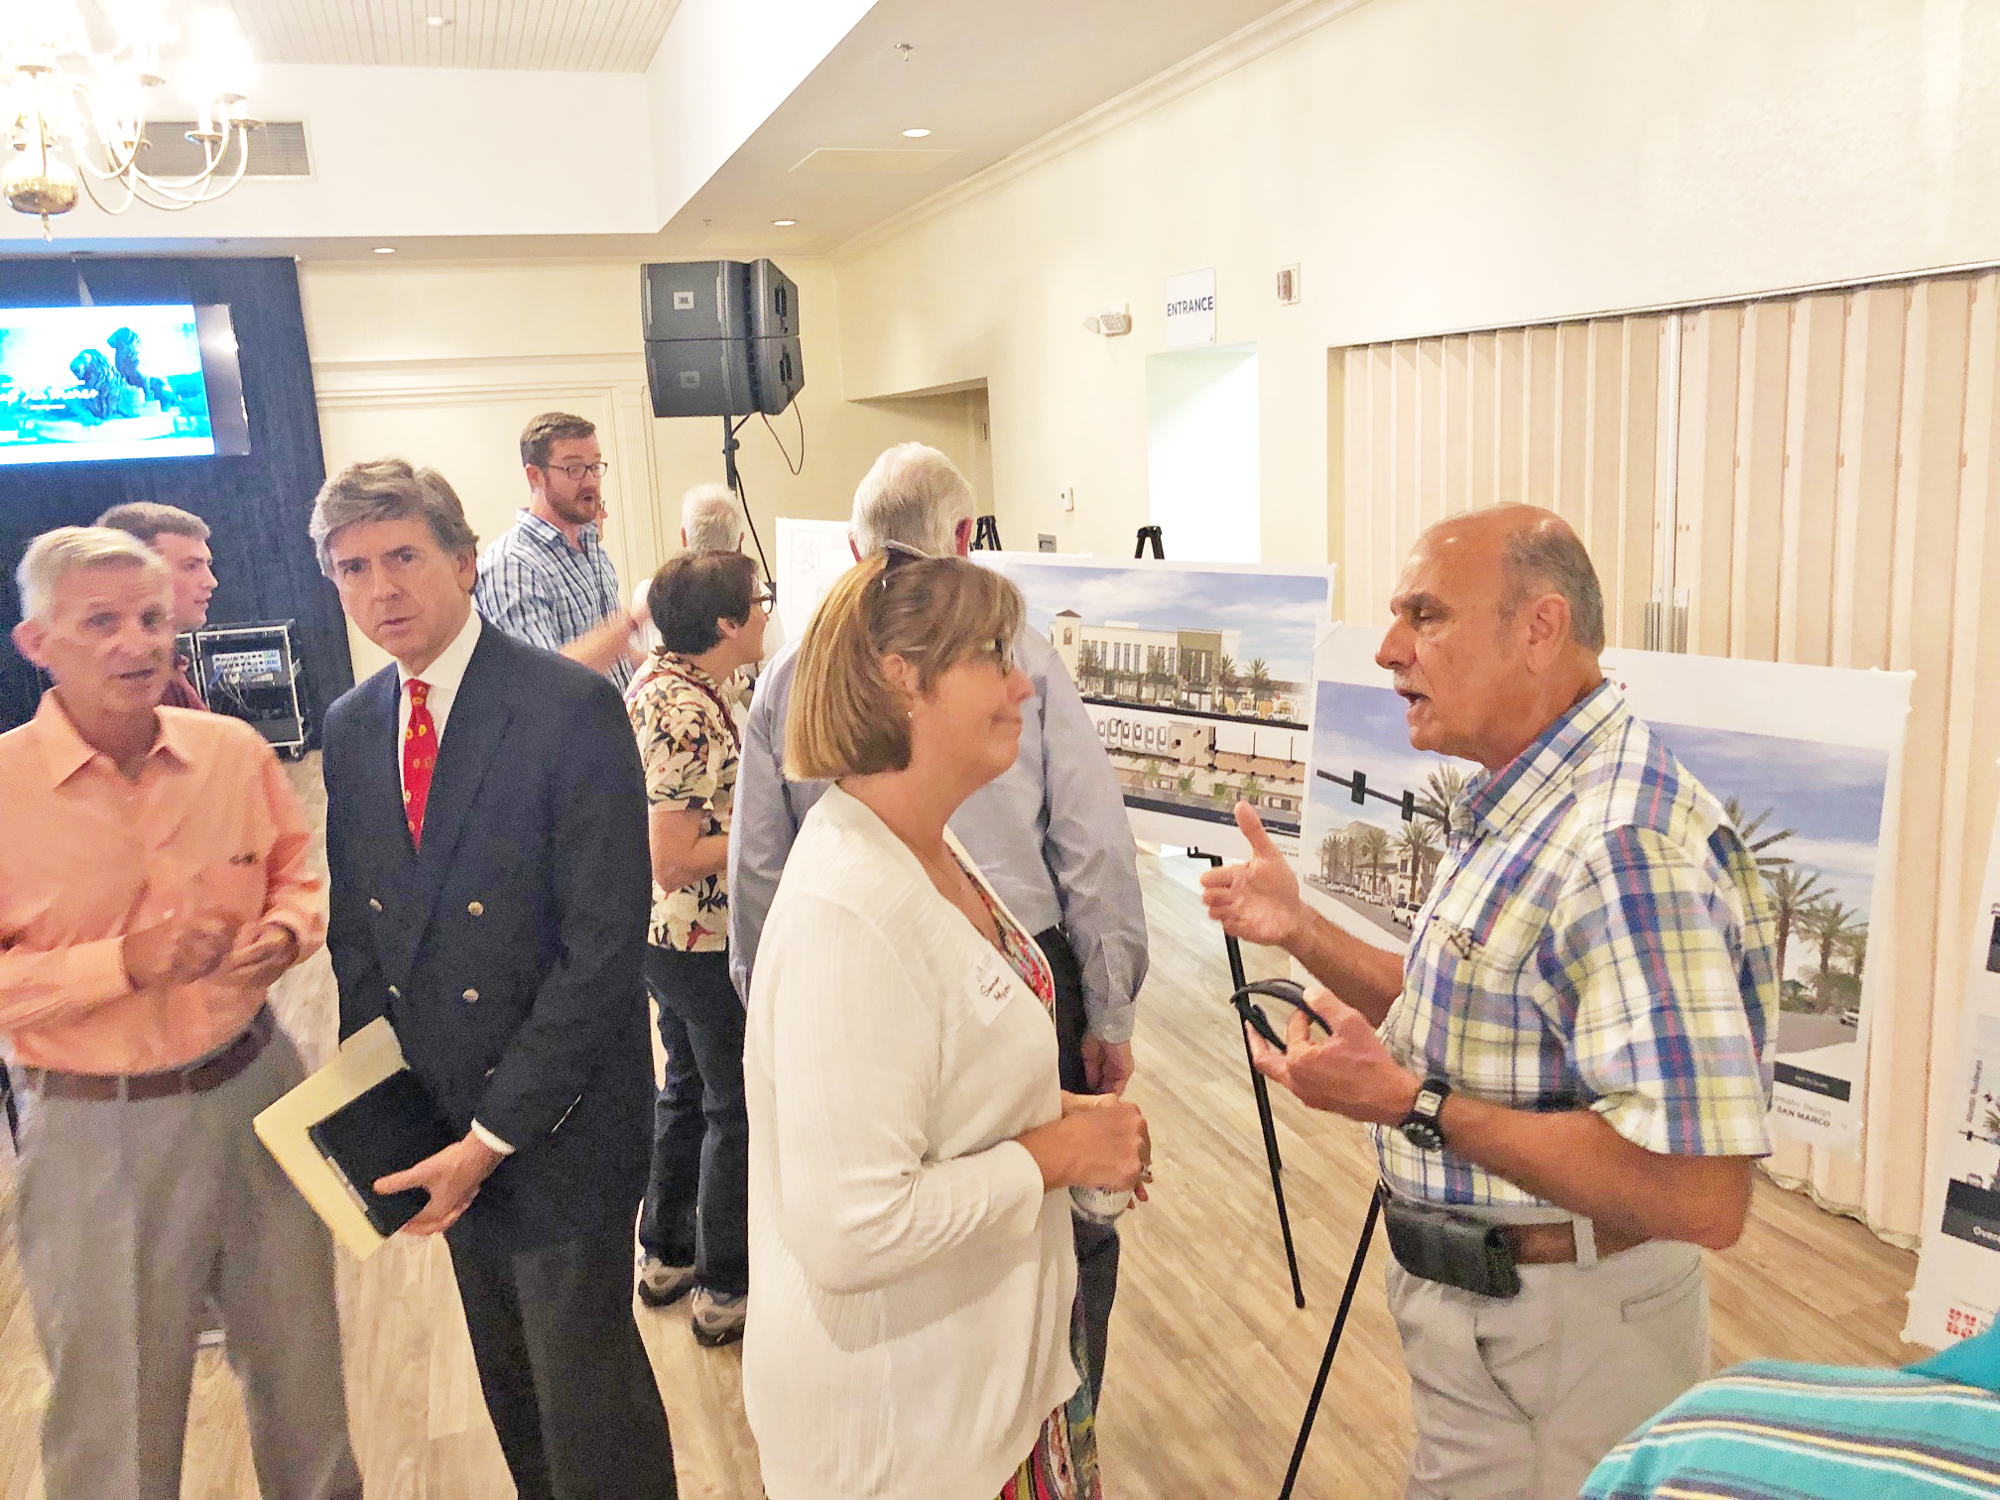 Developer Regency Centers Corp. presented the plans at the town hall meeting.